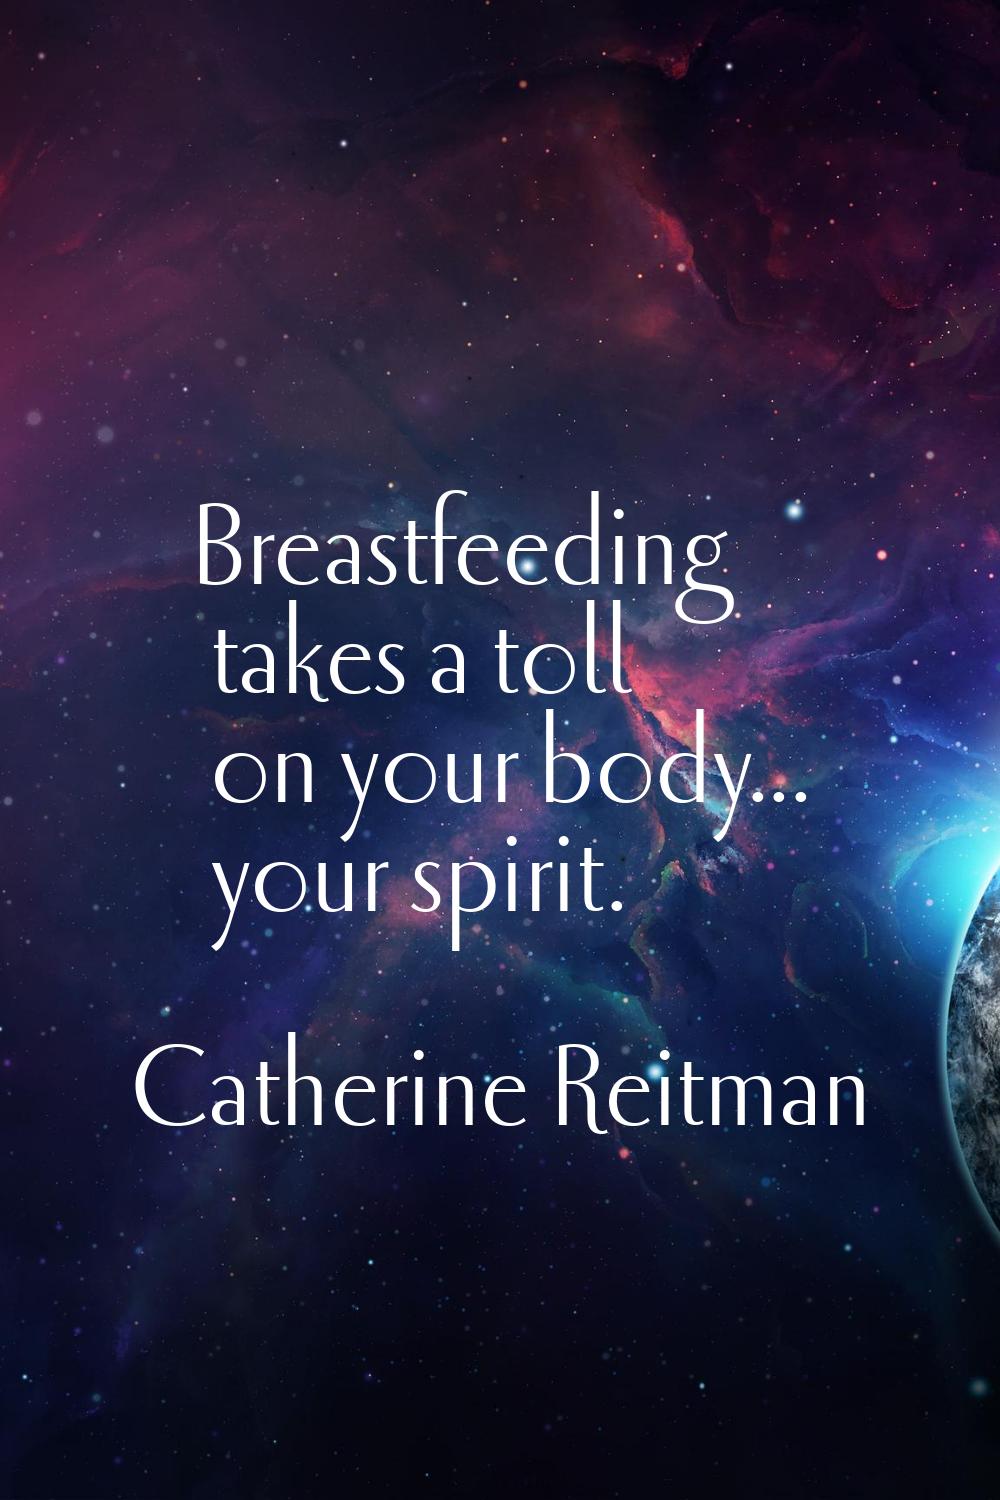 Breastfeeding takes a toll on your body... your spirit.